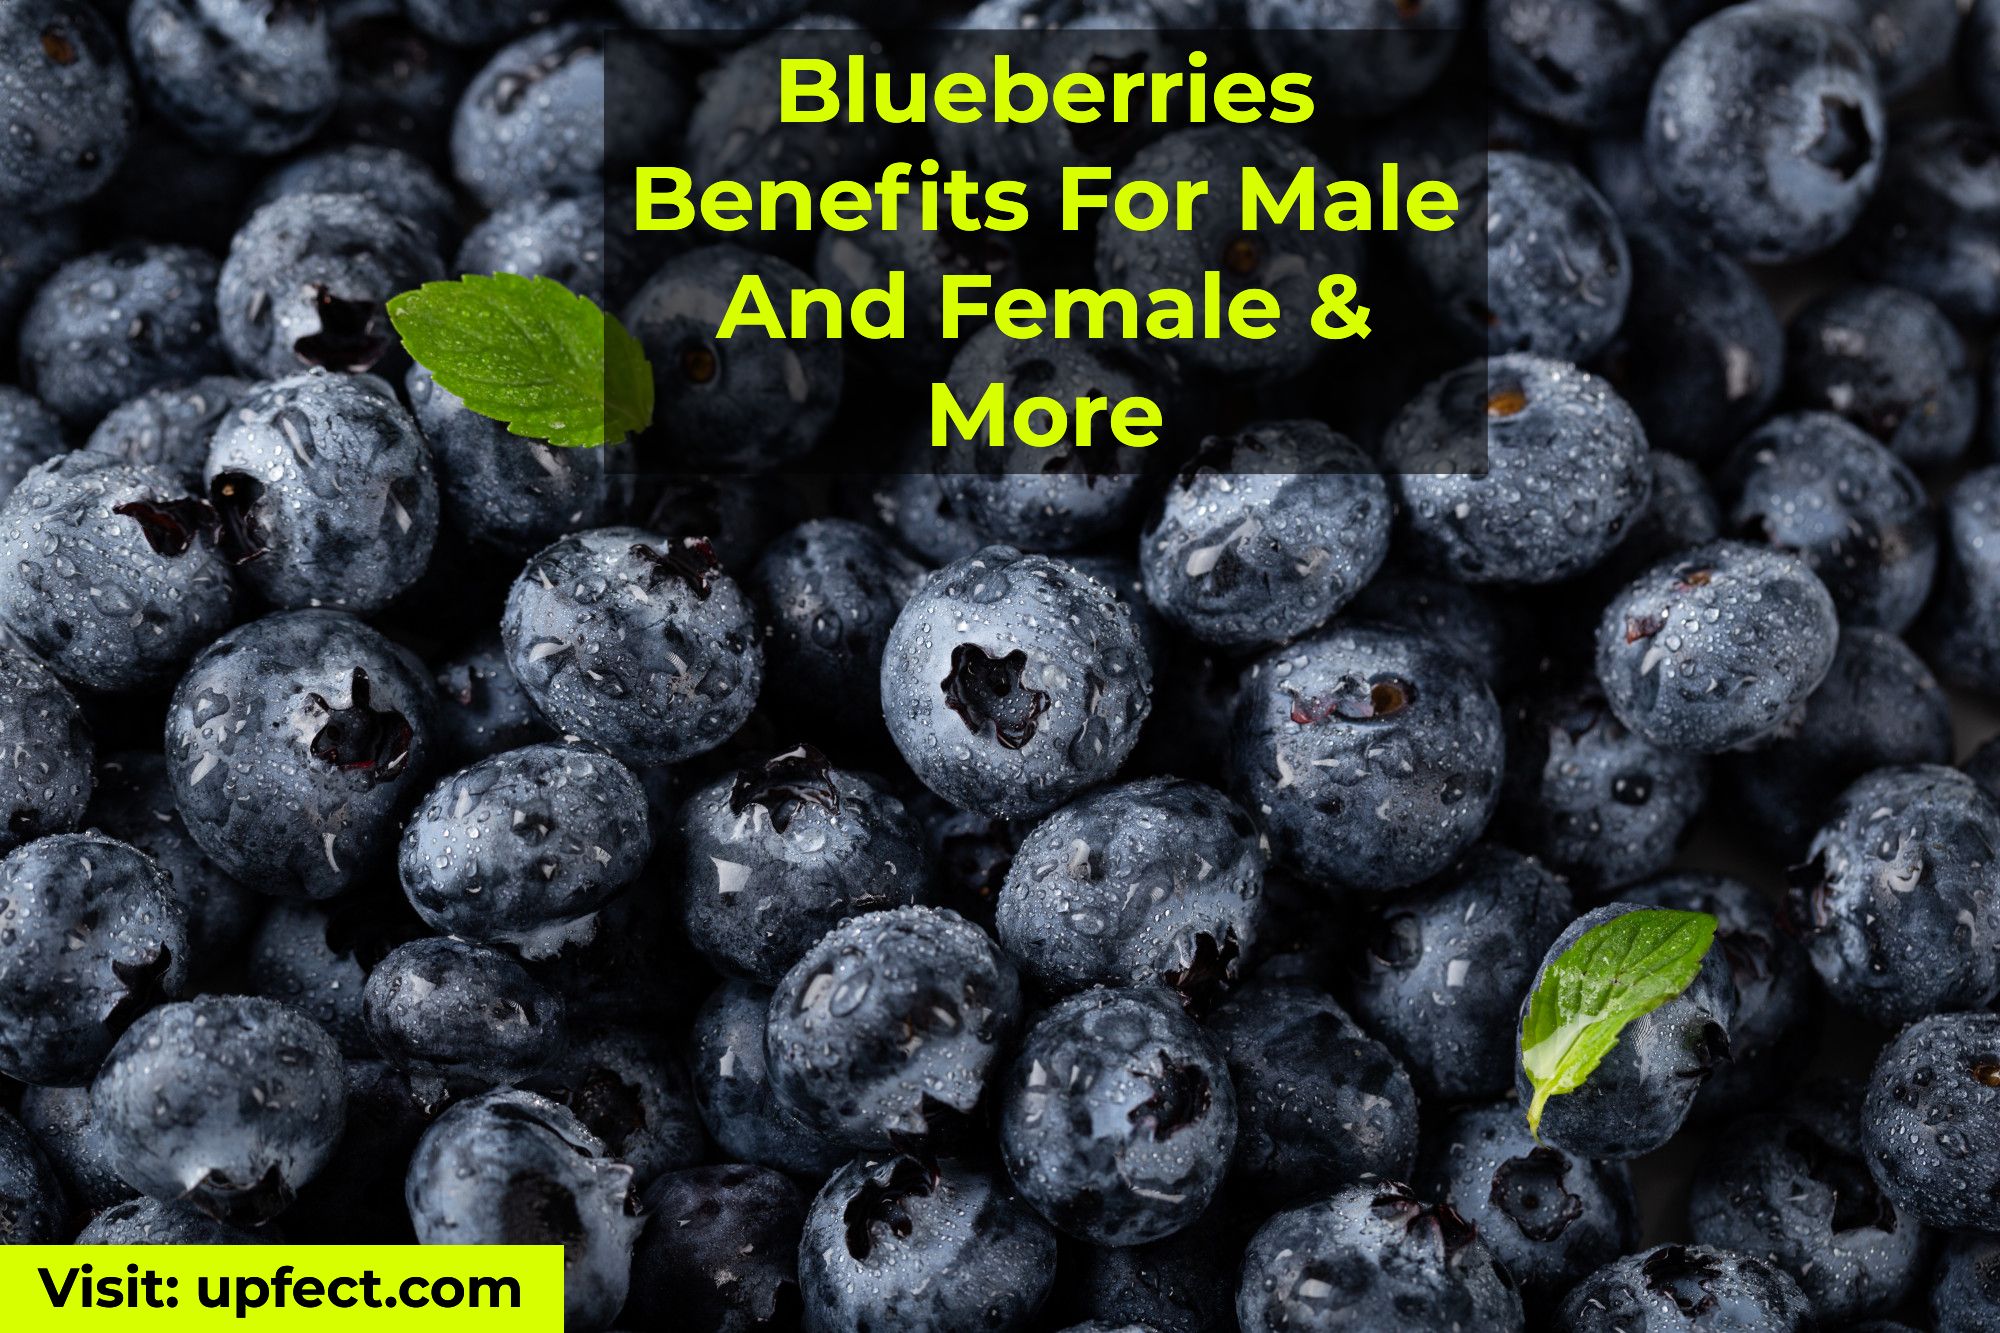 Blueberries Benefits For Male